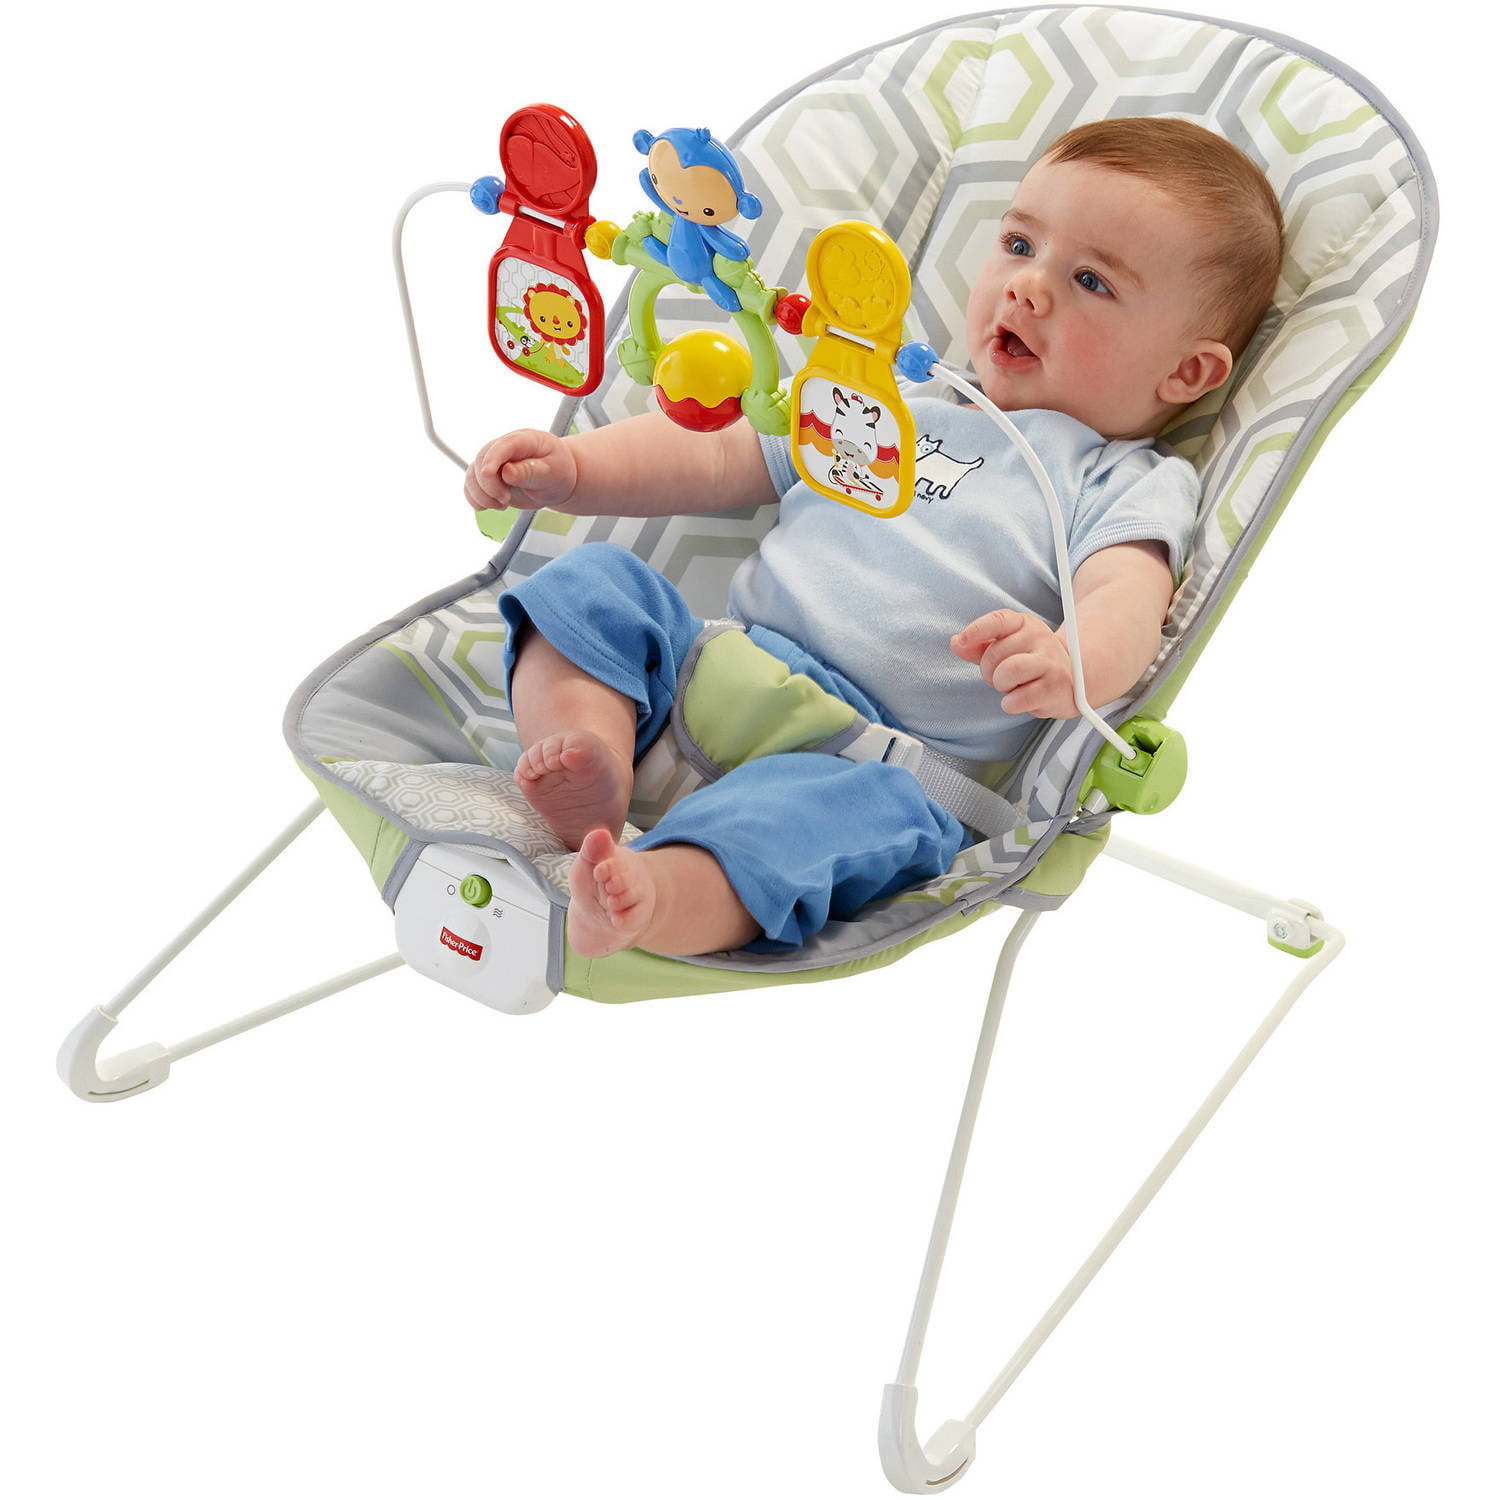 baby bouncer age